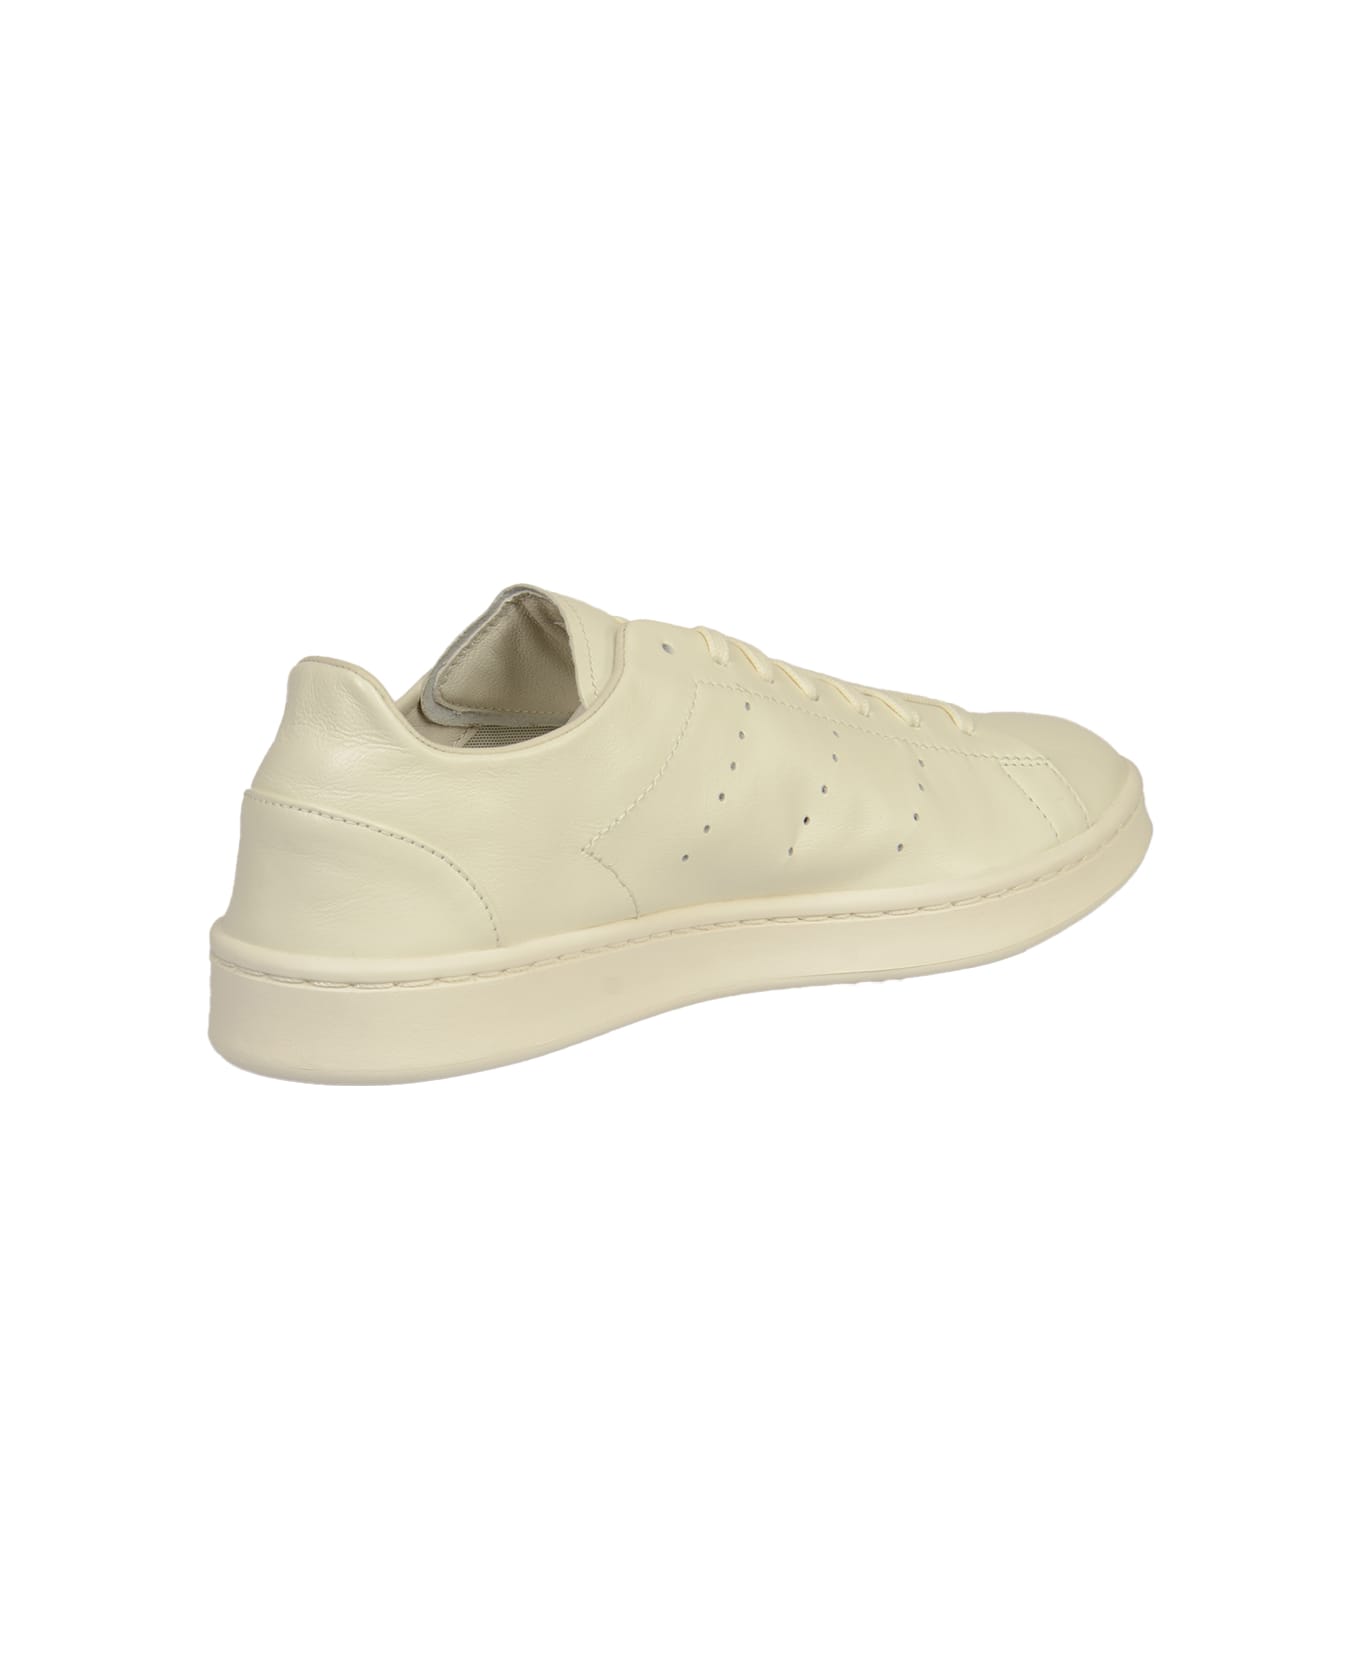 Y-3 Stan Smith Sneakers - Off White スニーカー